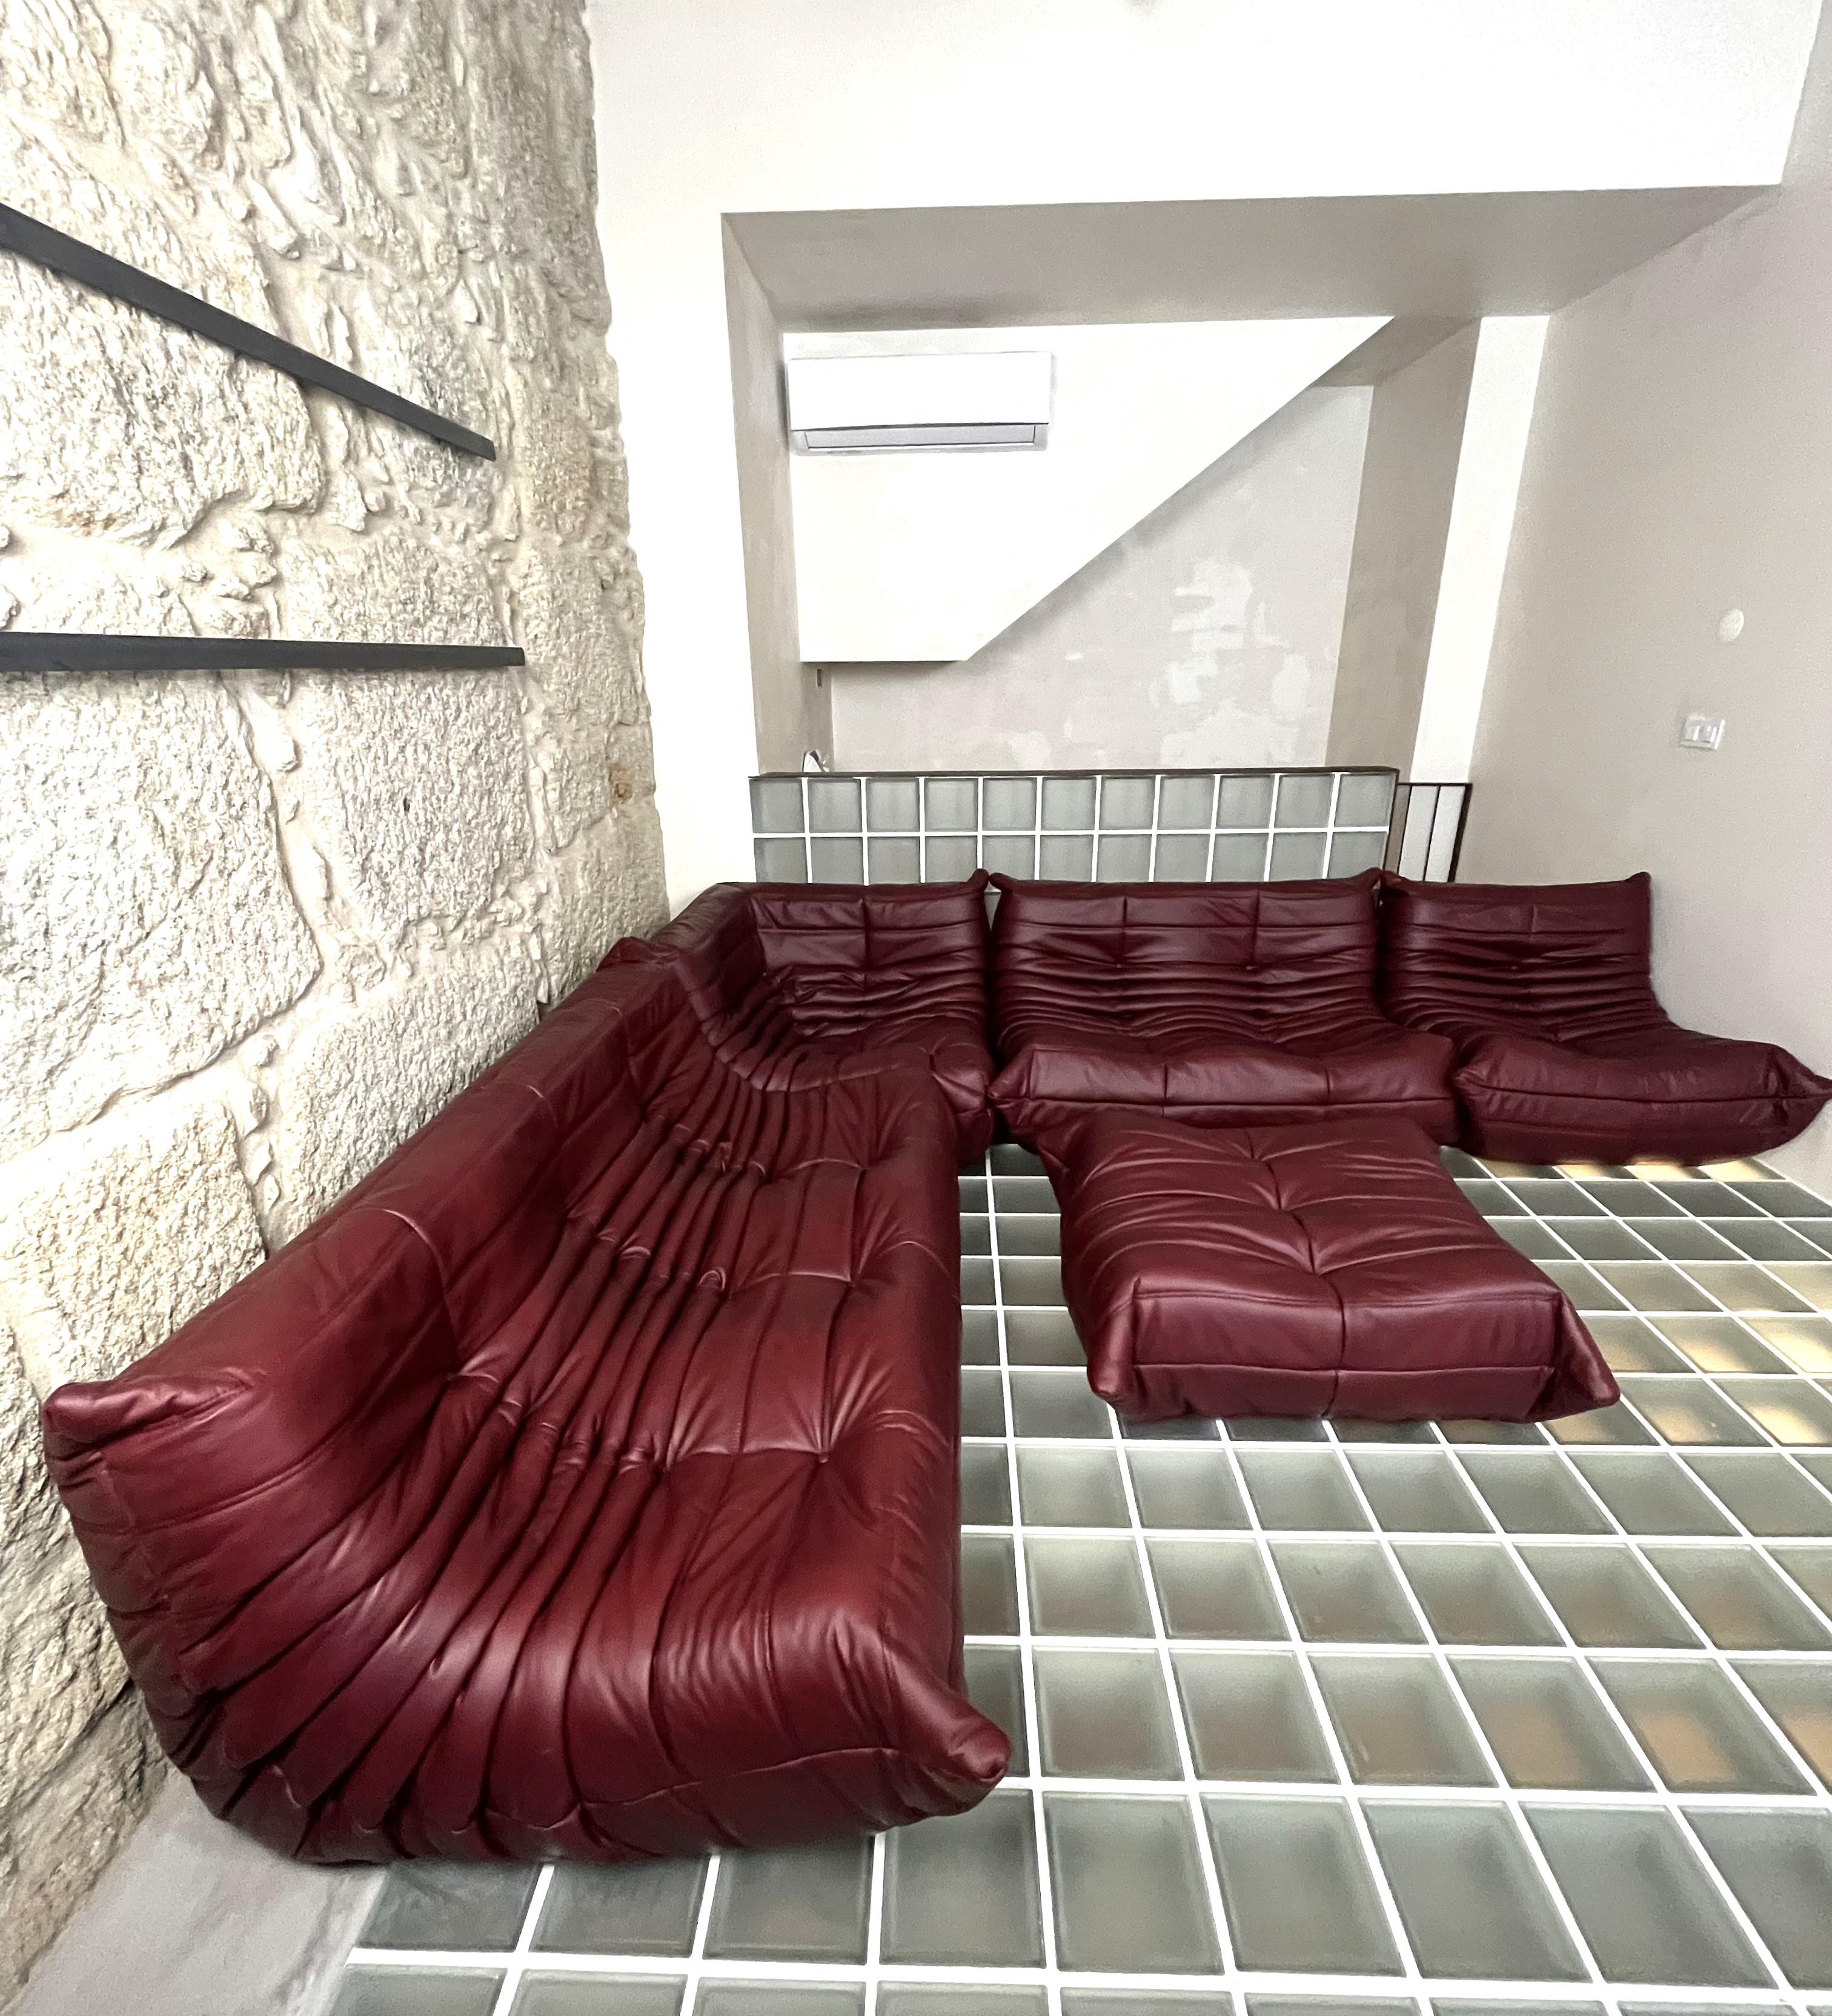 Togo sofa by Michel Ducaroy for Ligne Roset. 5 pieces set
Togo was designed in 1973.
Five pieces set: three seater, twoseater, one seater, corner and pouf.
The sofa is upholstered in bordeaux leather.
the set is very versatile, five pieces can be